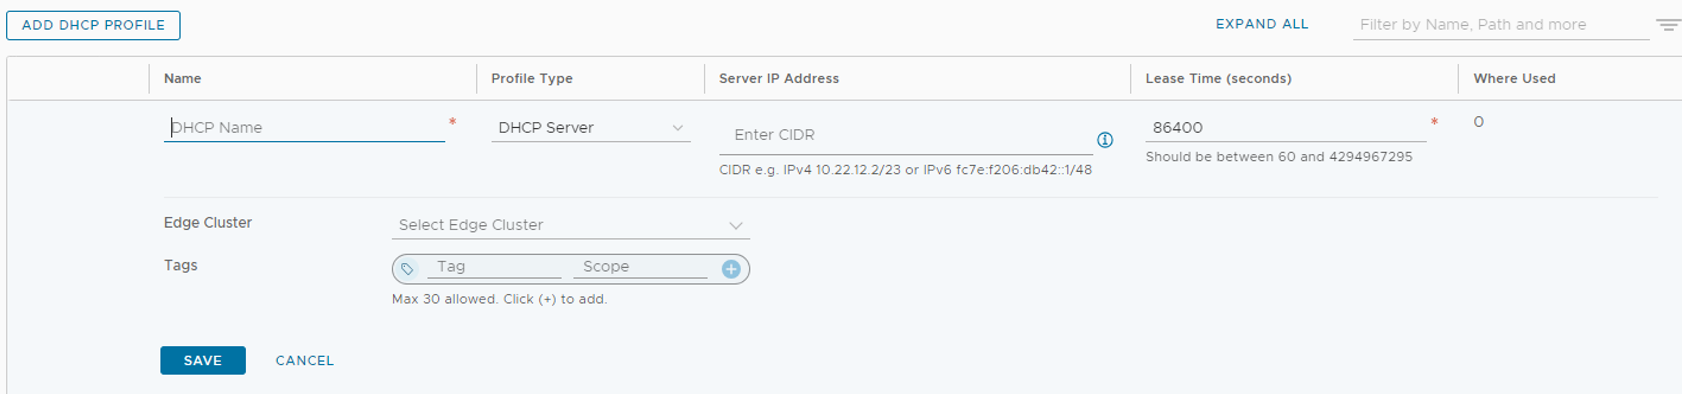 Screenshot showing how to add a DHCP Profile in NSX-T Manager.